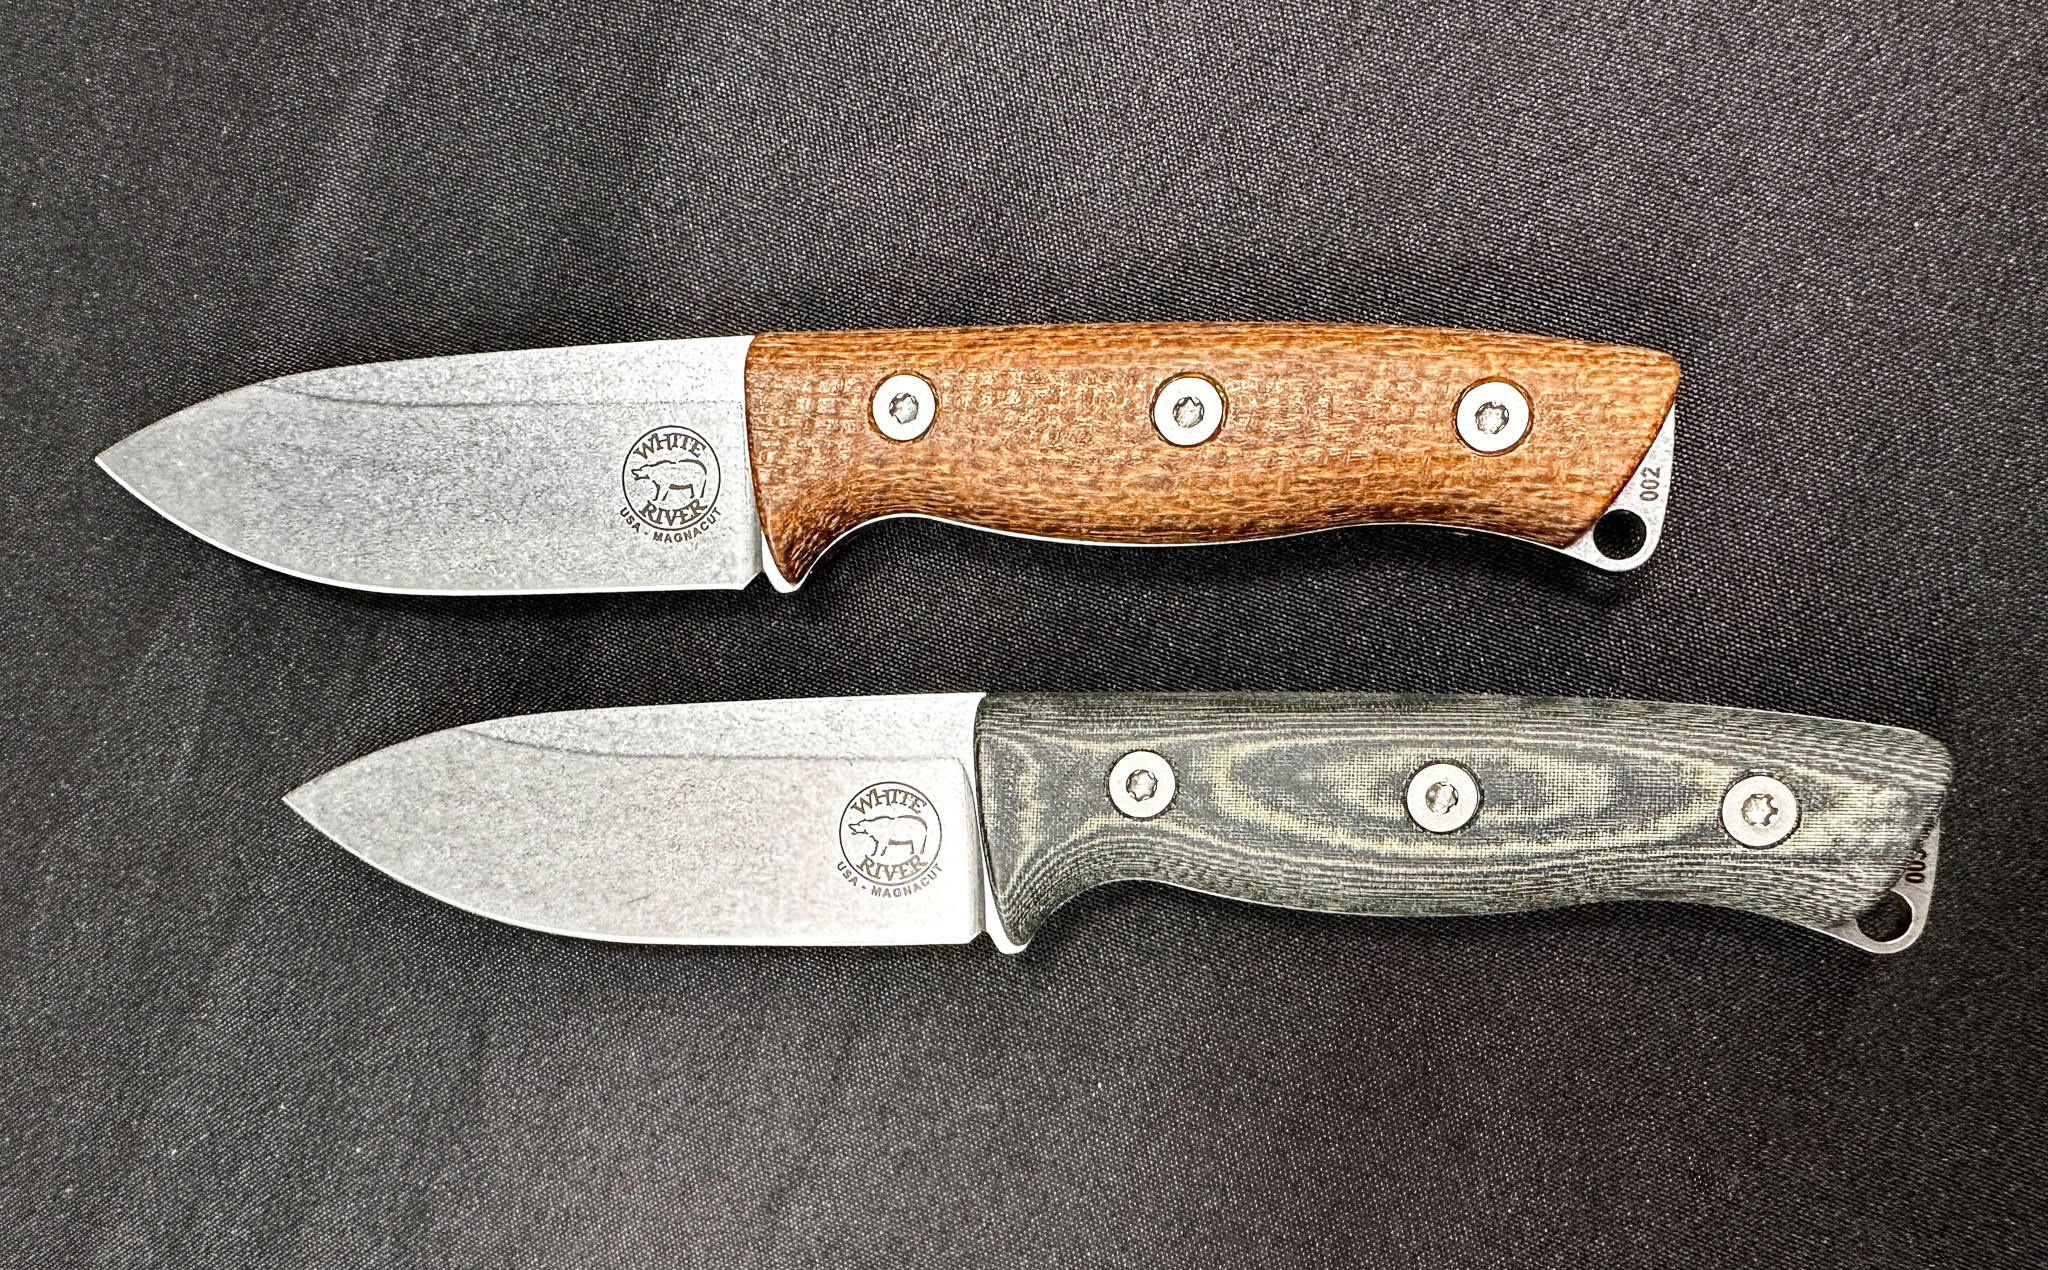 Two short fixed-blade knives side-by-side